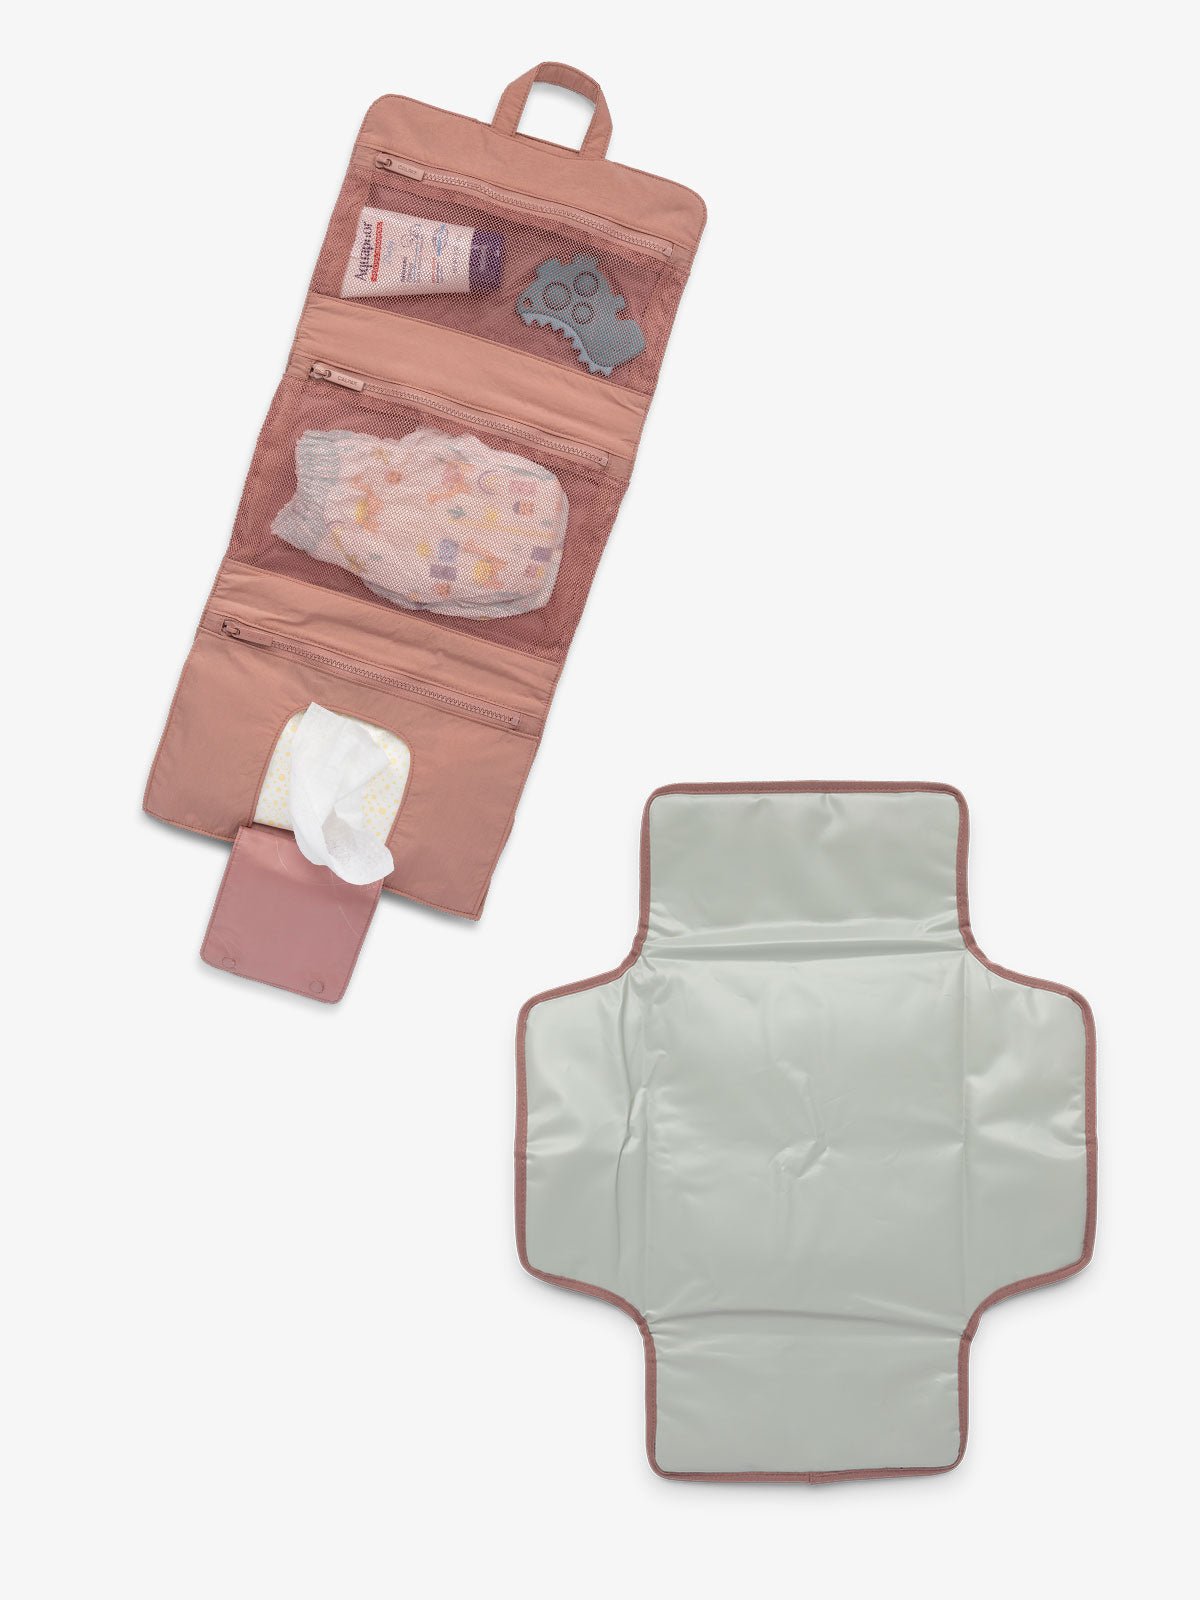 CALPAK portable changing pad includes multiple pockets, collapsing hanging hook, and detachable changing pad in pink